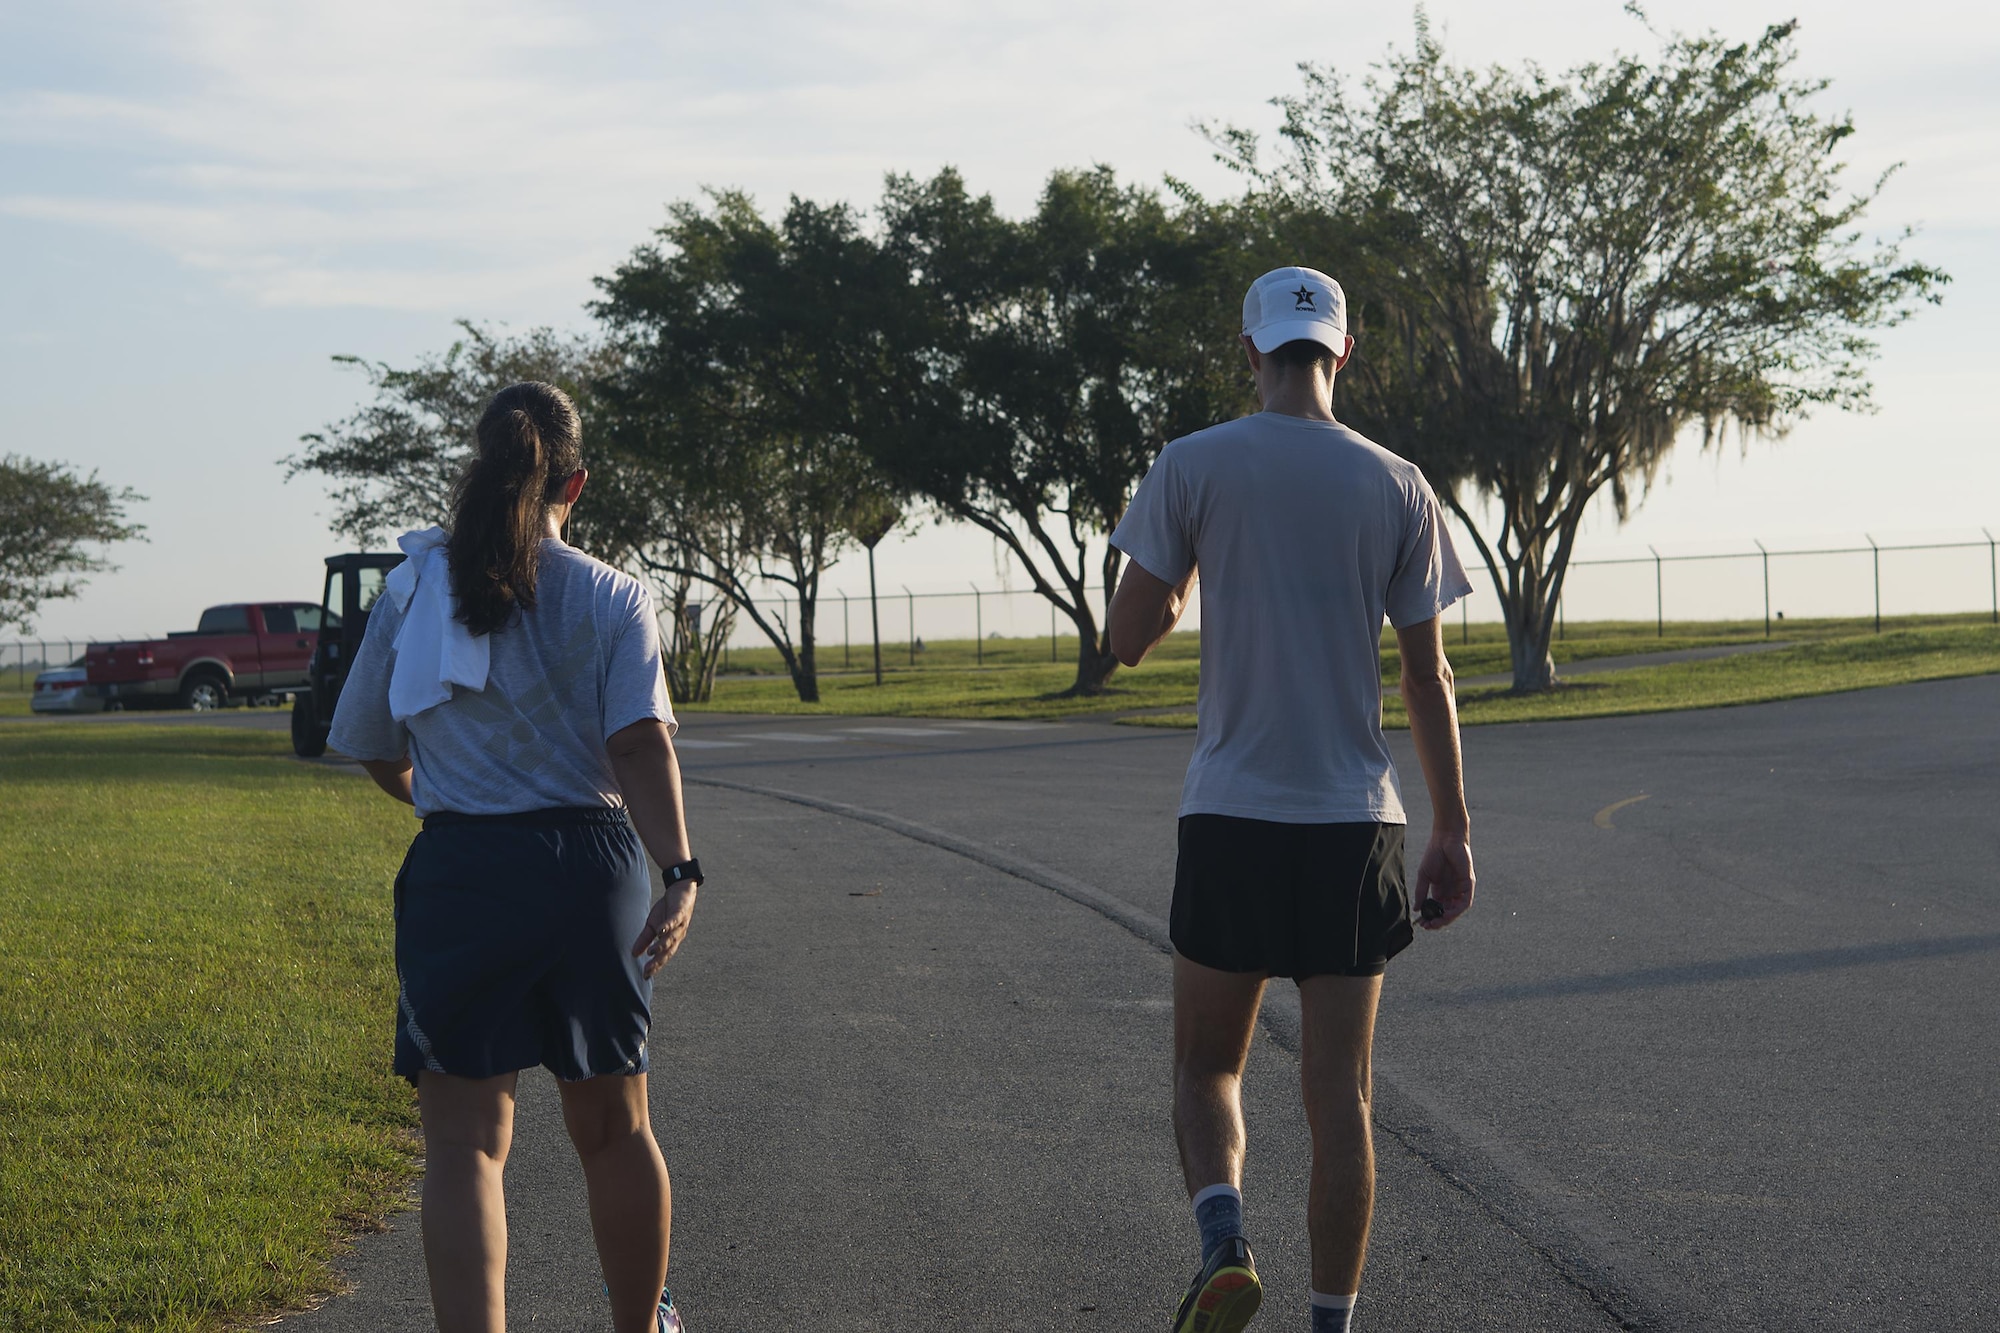 Master Sgt. Regina Dockens, 23d Communication Squadron first sergeant, left, and Capt. Austin Gibbons, 23d Operations Support Squadron flight commander of weather, walk away after finishing the National Preparedness Month 5k fun run, Sept. 1, 2017, at Moody Air Force Base, Ga. National Preparedness Month is designed to educate and empower not only the base, but also the community on preparing for any disaster. (U.S. Air Force photo by Airman 1st Class Erick Requadt)